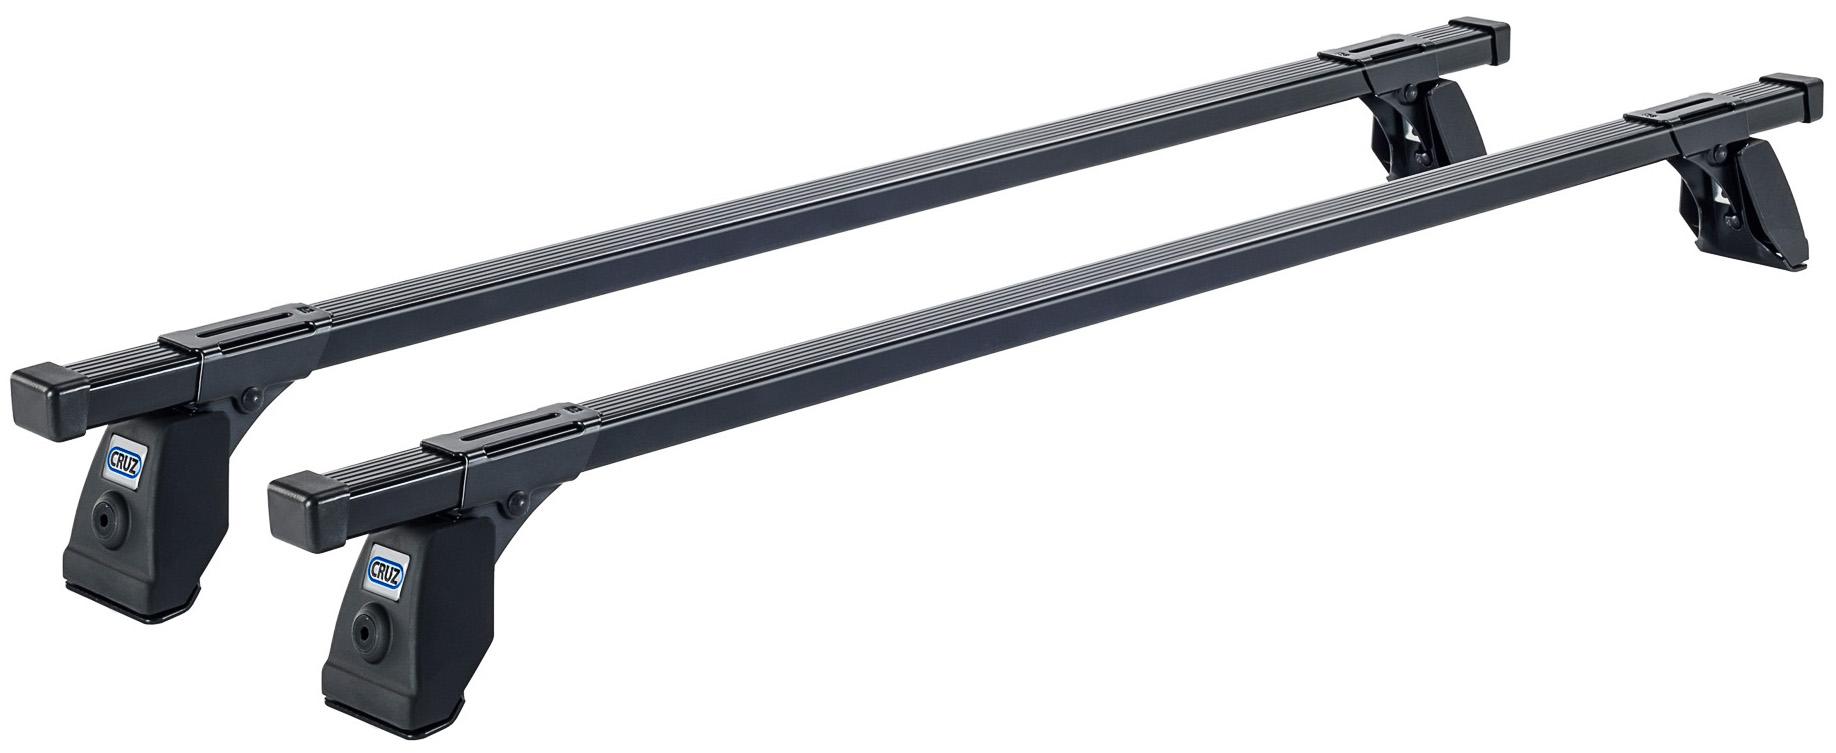 Cruz Commercial Roof Bars 30 X 20 922-431 - Pack Of 2